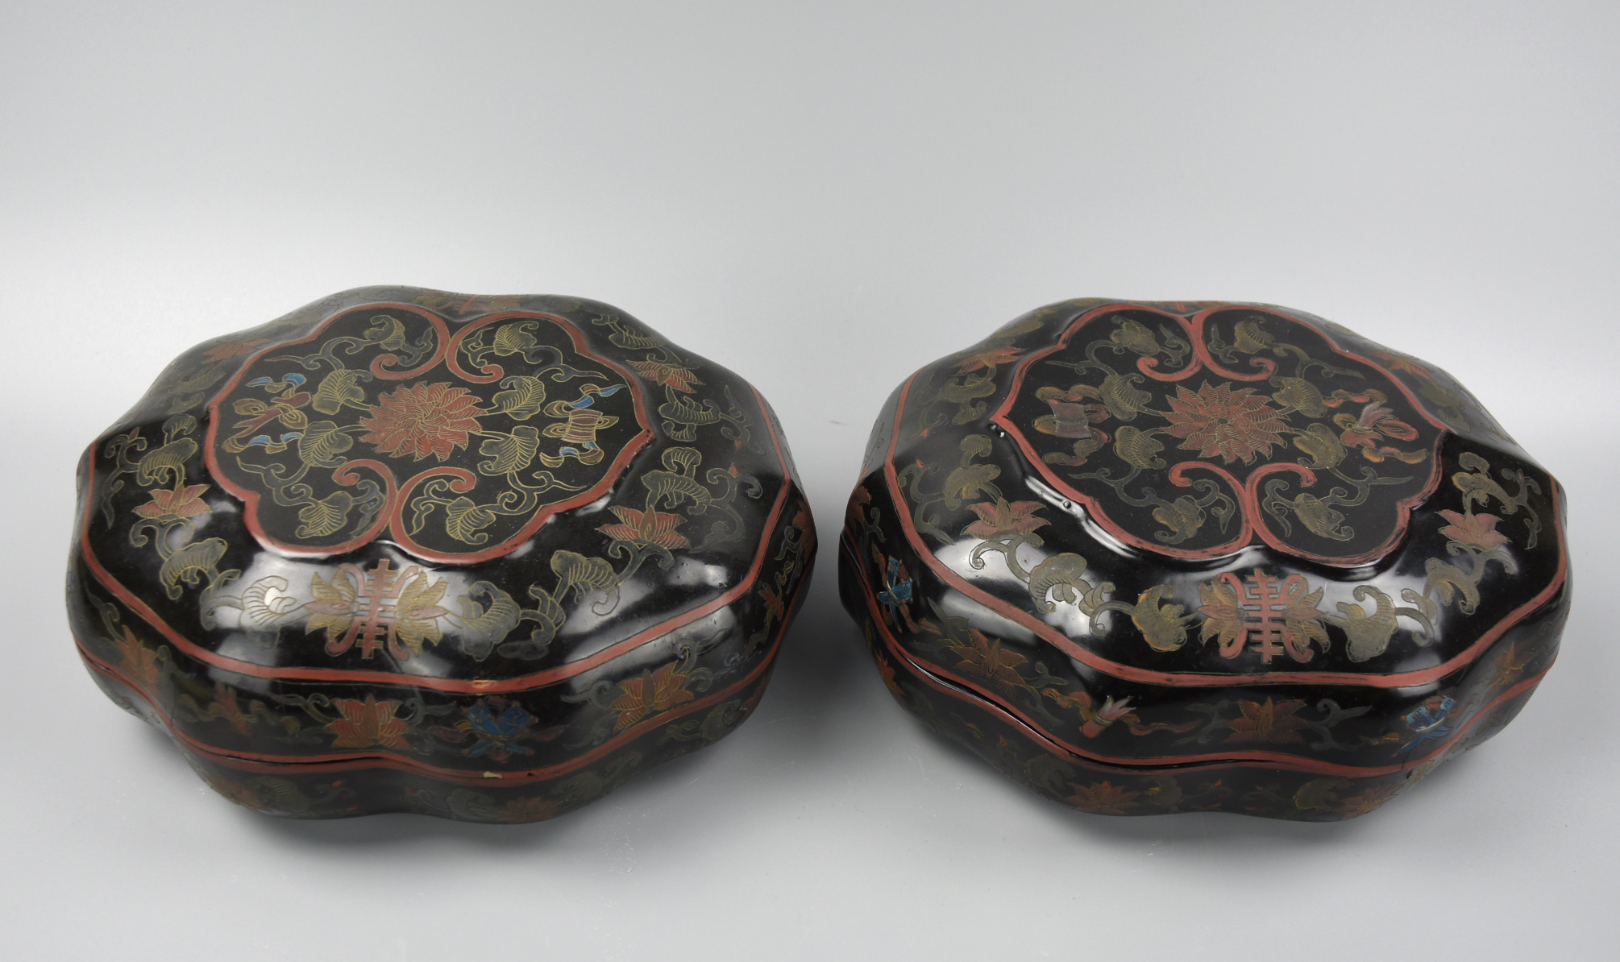 PAIR OF LACQUERWARE BOXES & COVER,20TH